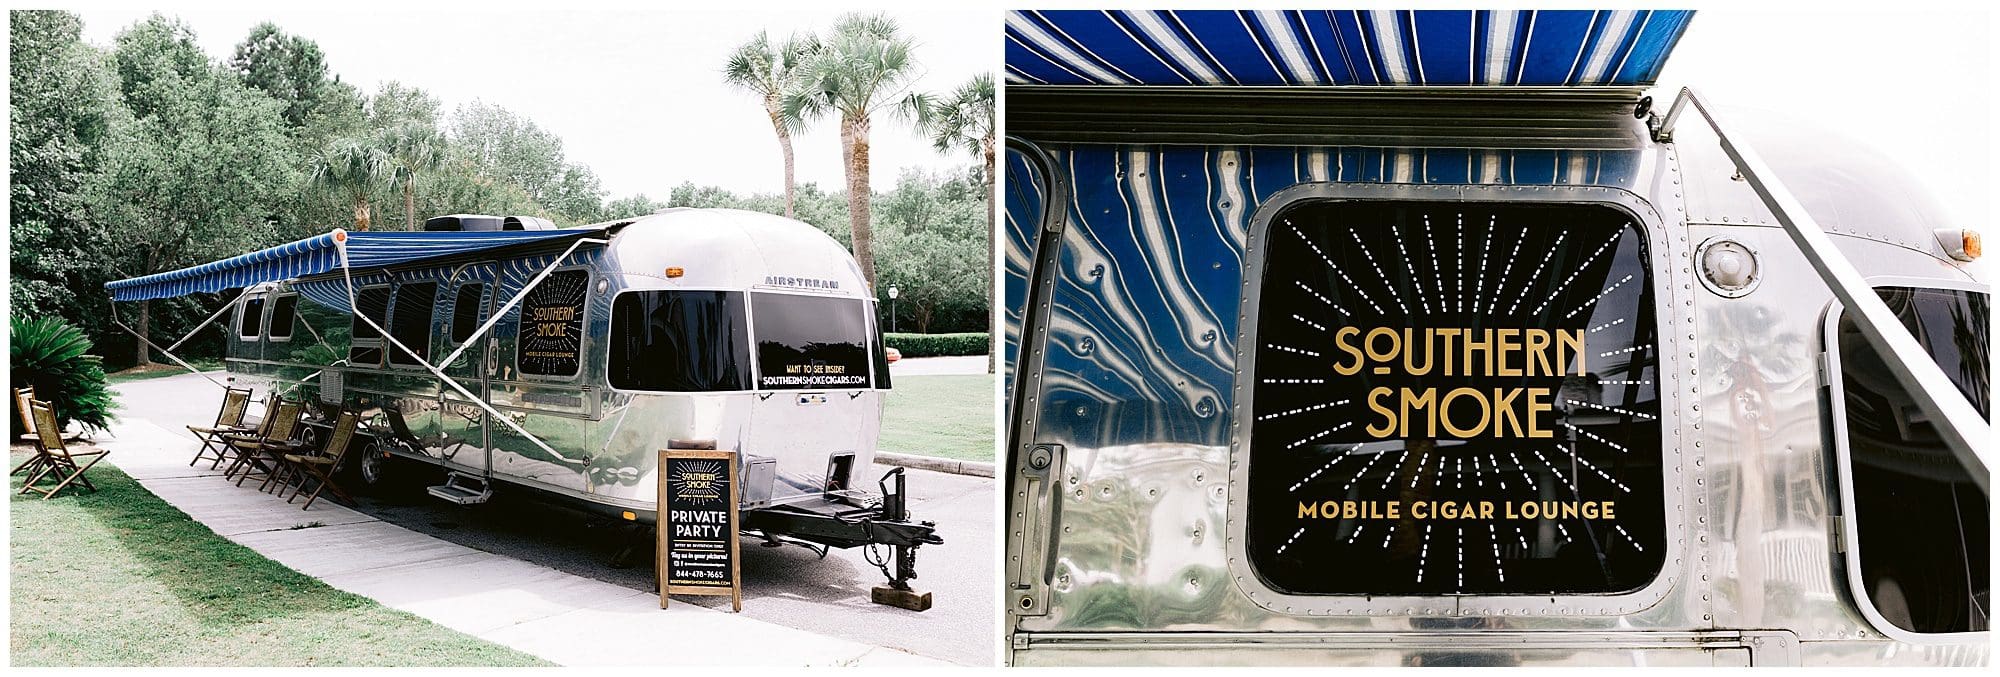 Mobile Cigar Lounge for guests at this Charleston area wedding.